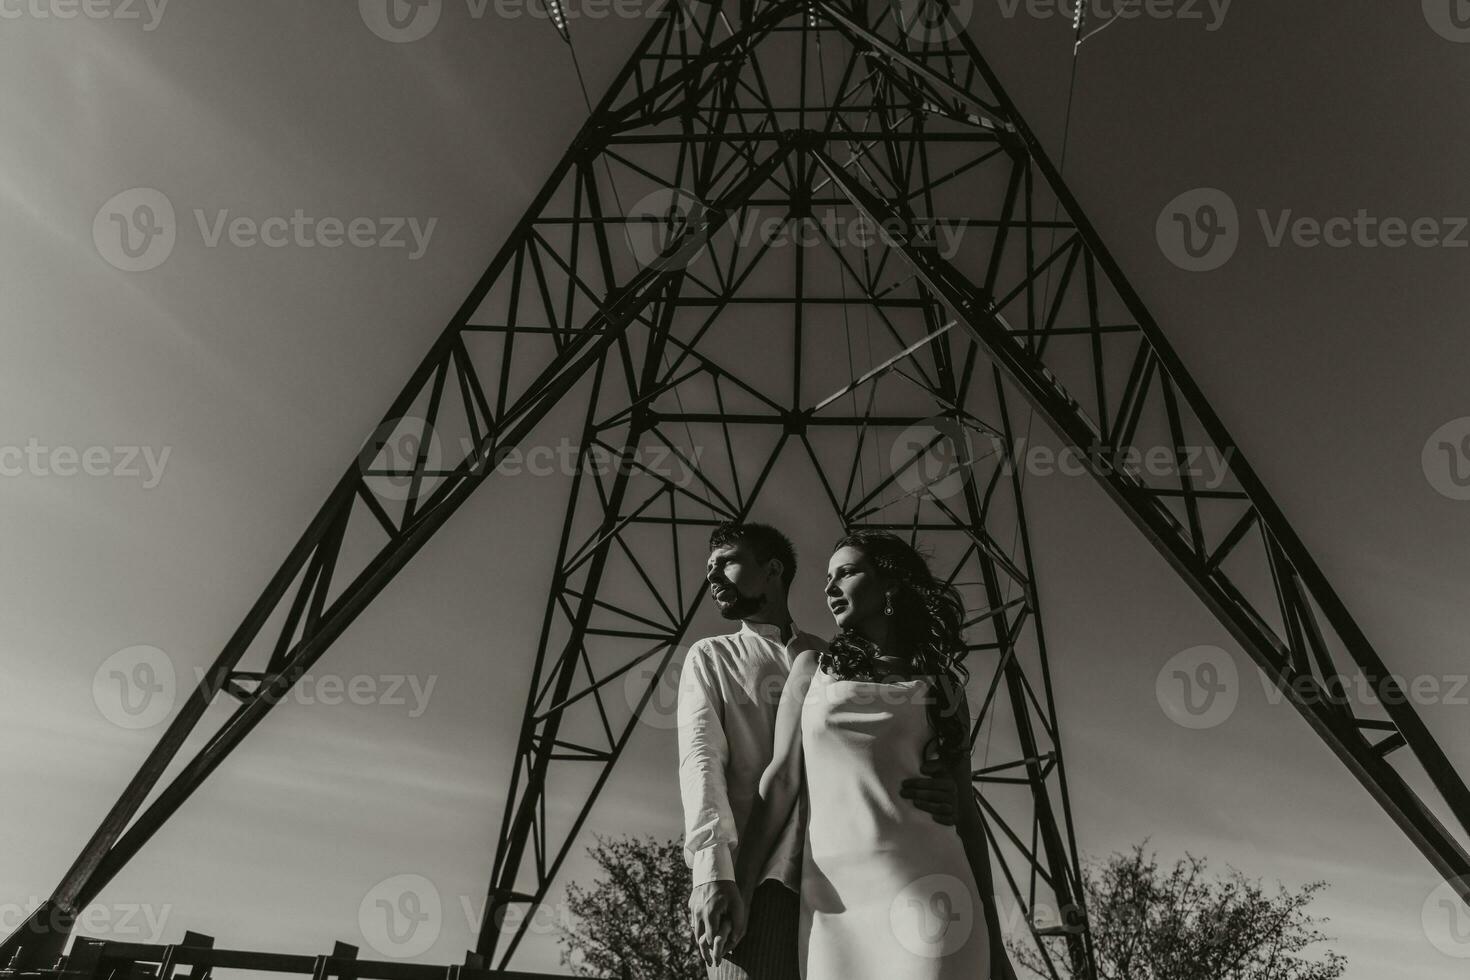 Stylish model couple in the mountains in summer. A young boy and girl in a white silk dress are standing near large structures of power lines. Black and white contrast photo